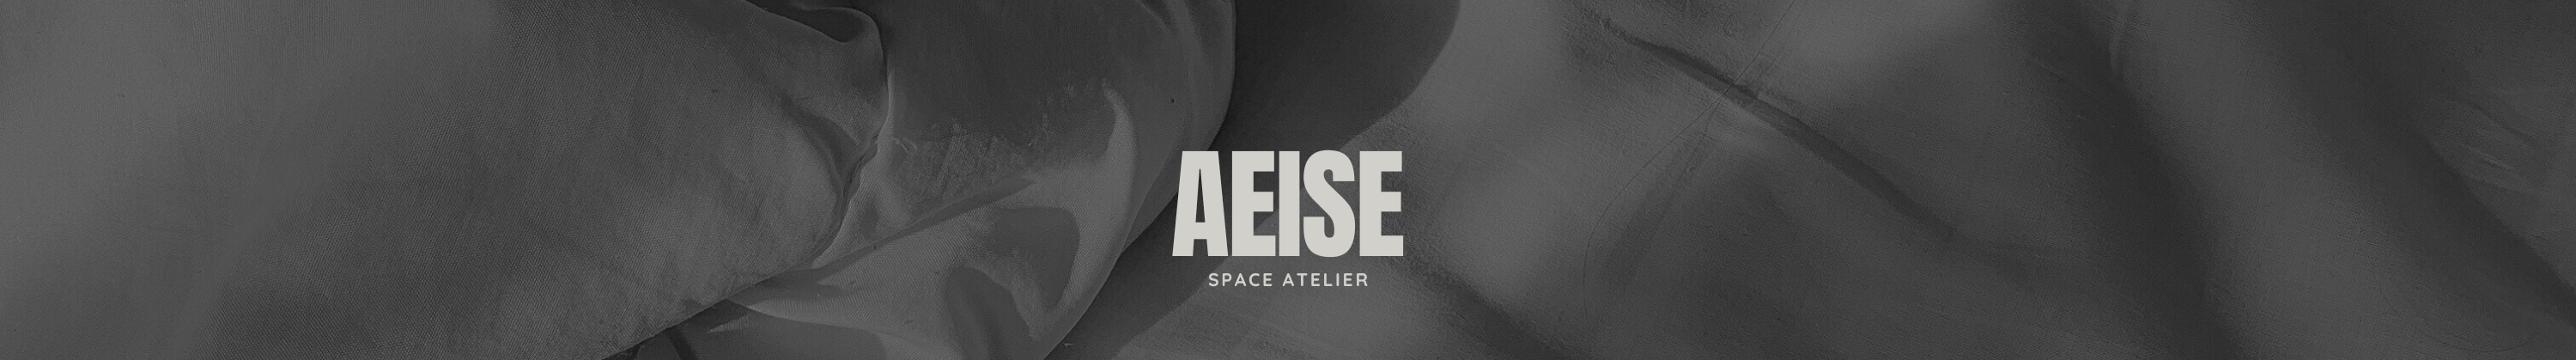 AEISE SPACE ATELIER's profile banner